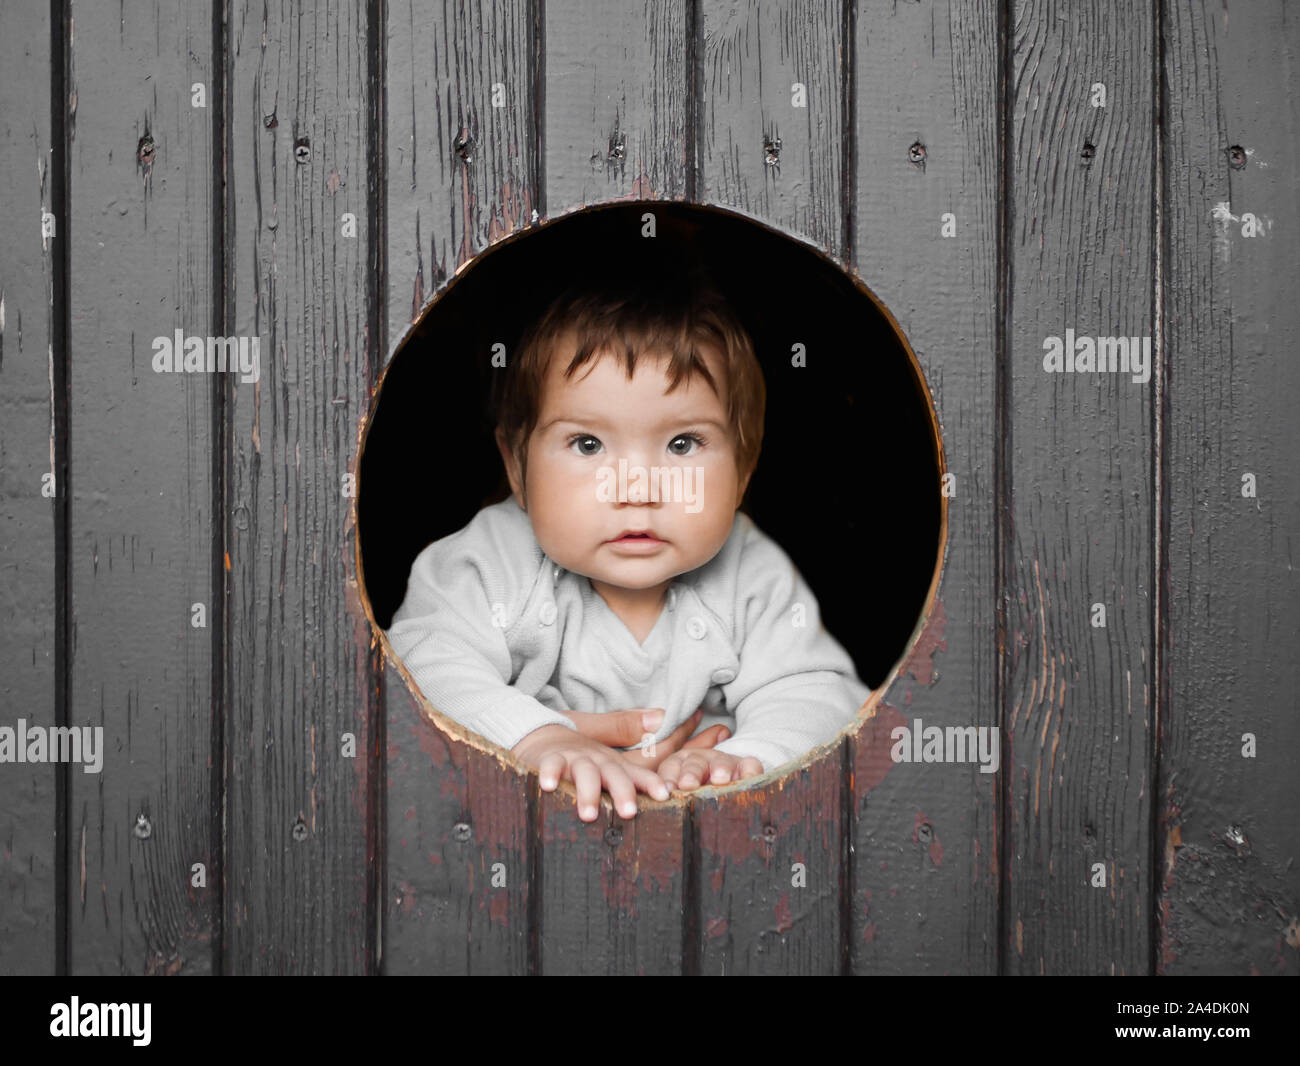 child looks out of a round wooden window and smiles. The boy climbed out of the round window and smiles pretty straight into the frame. Cheerful Stock Photo